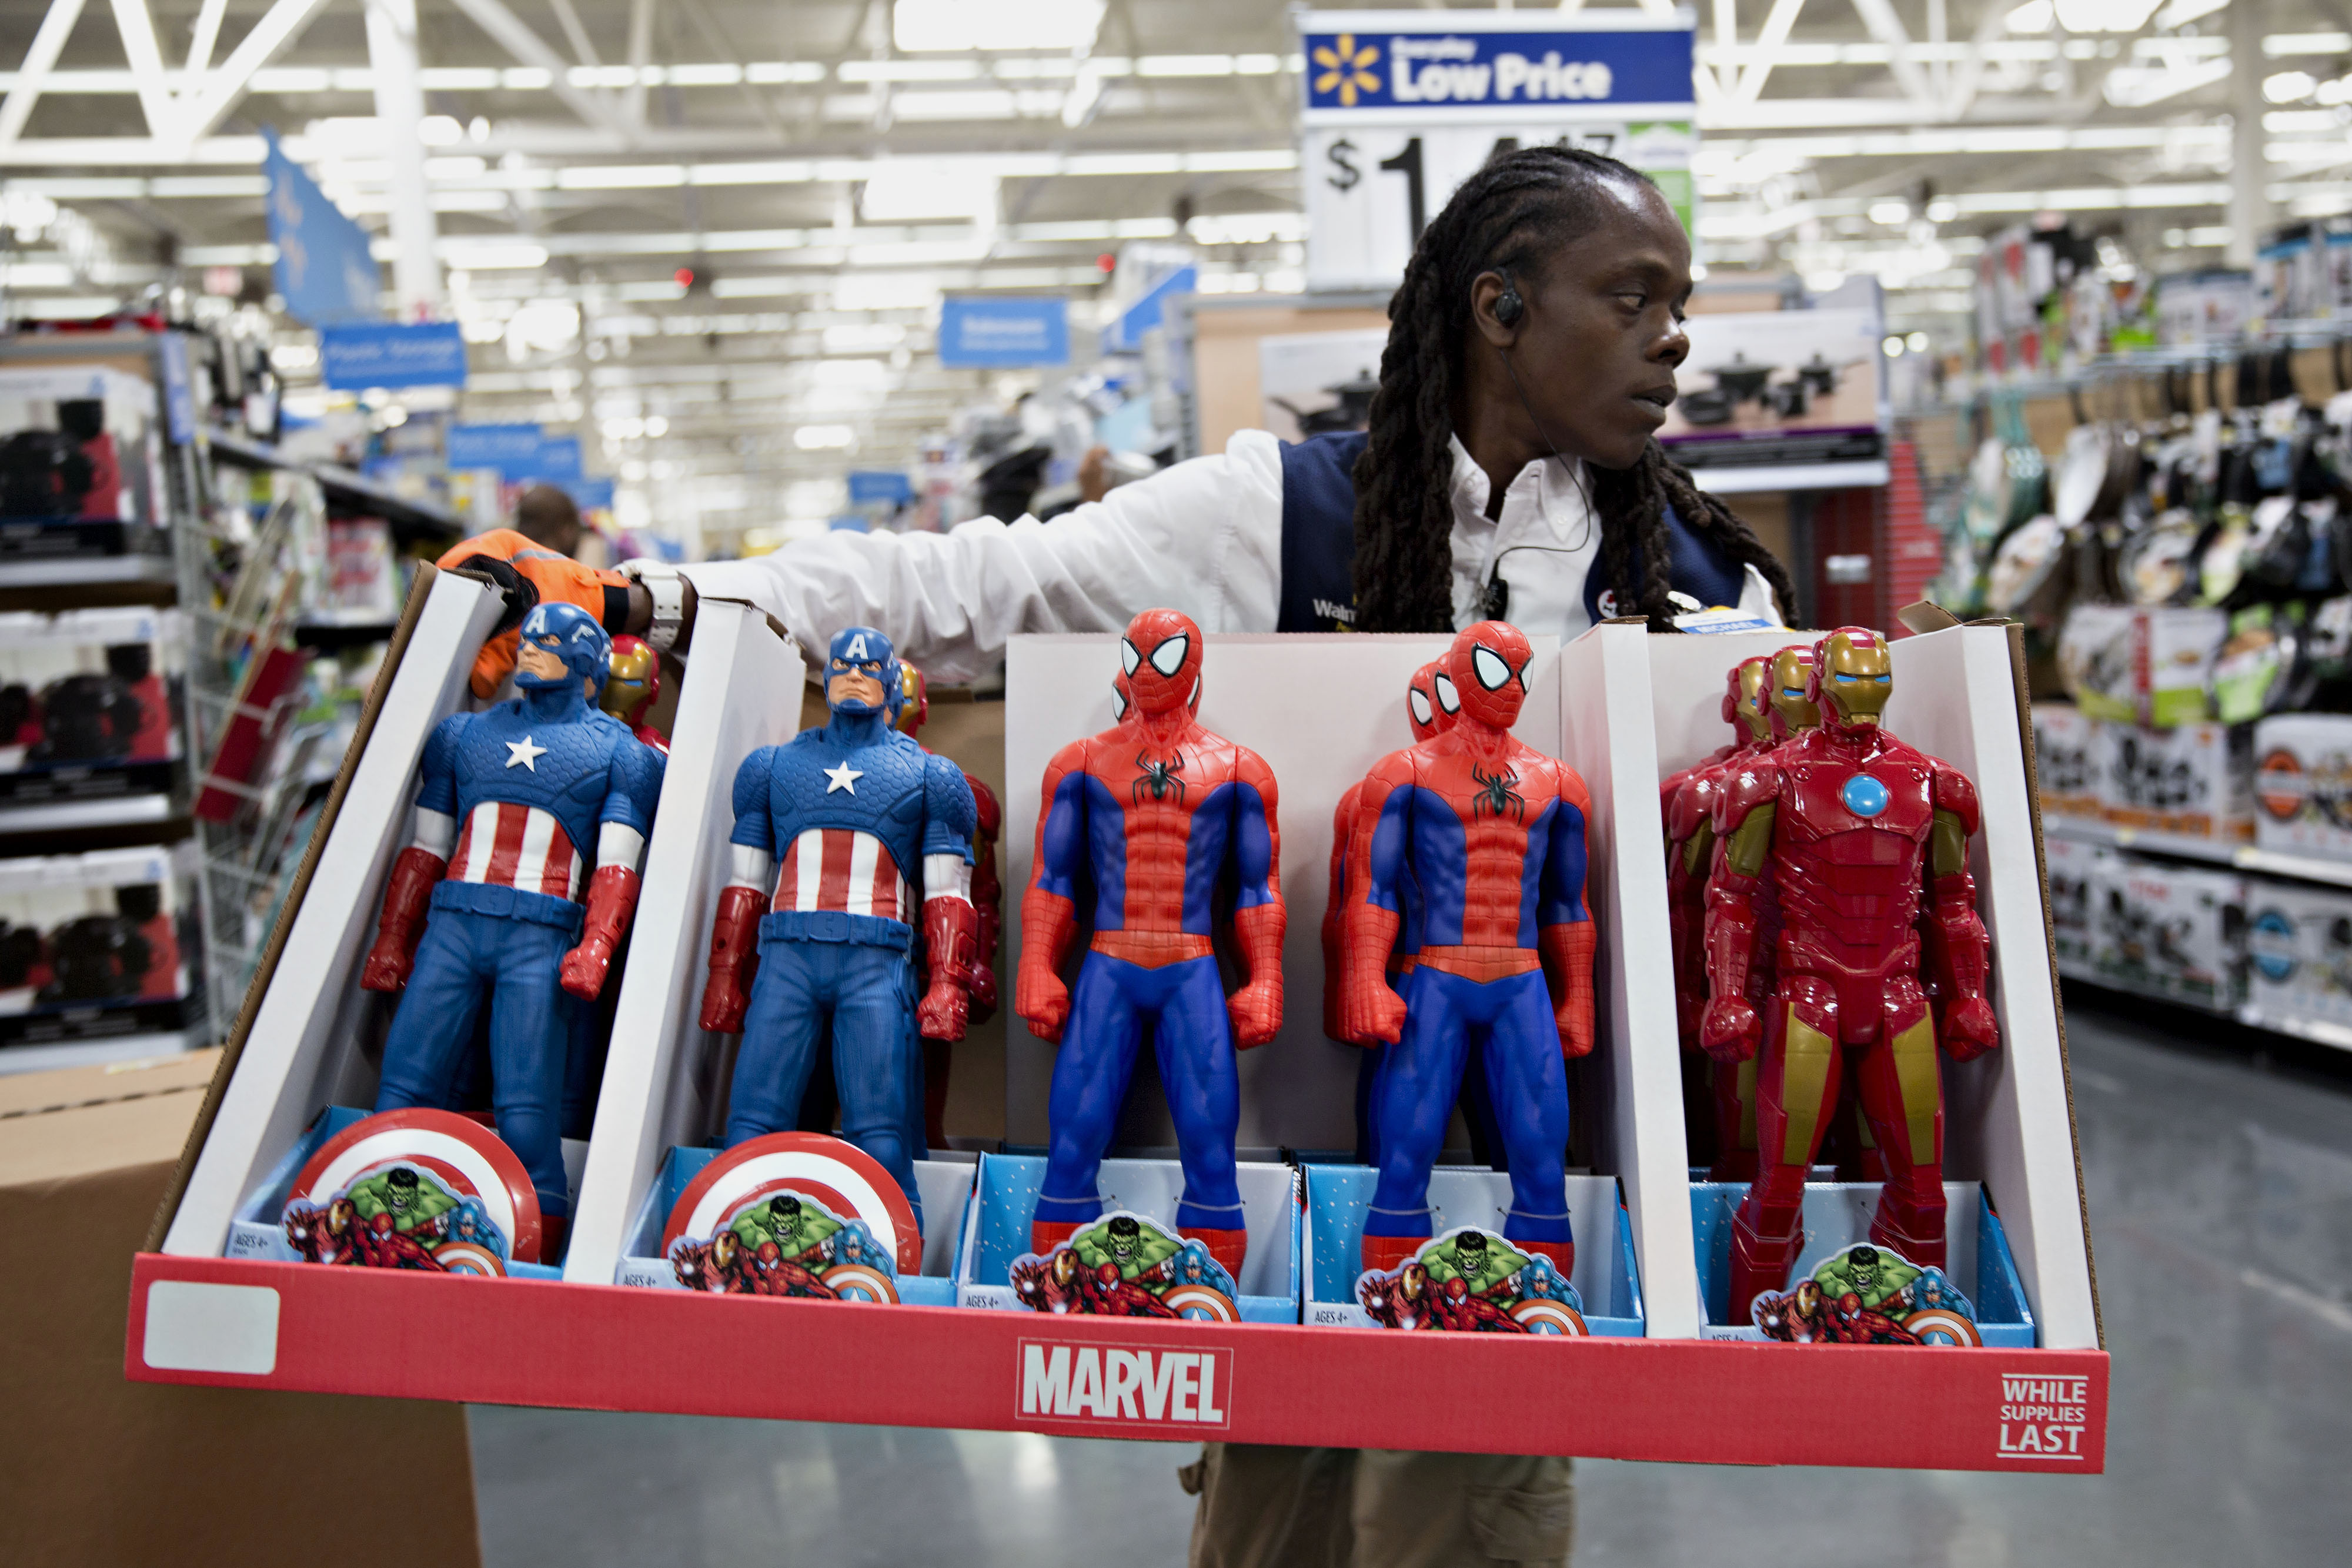 An employee moves Marvel Entertainment LLC action figures in preparation for Black Friday at a Wal-Mart Stores Inc. location in Chicago, Illinois, U.S., on Wednesday, Nov. 25, 2015. (Bloomberg&mdash;Bloomberg via Getty Images)